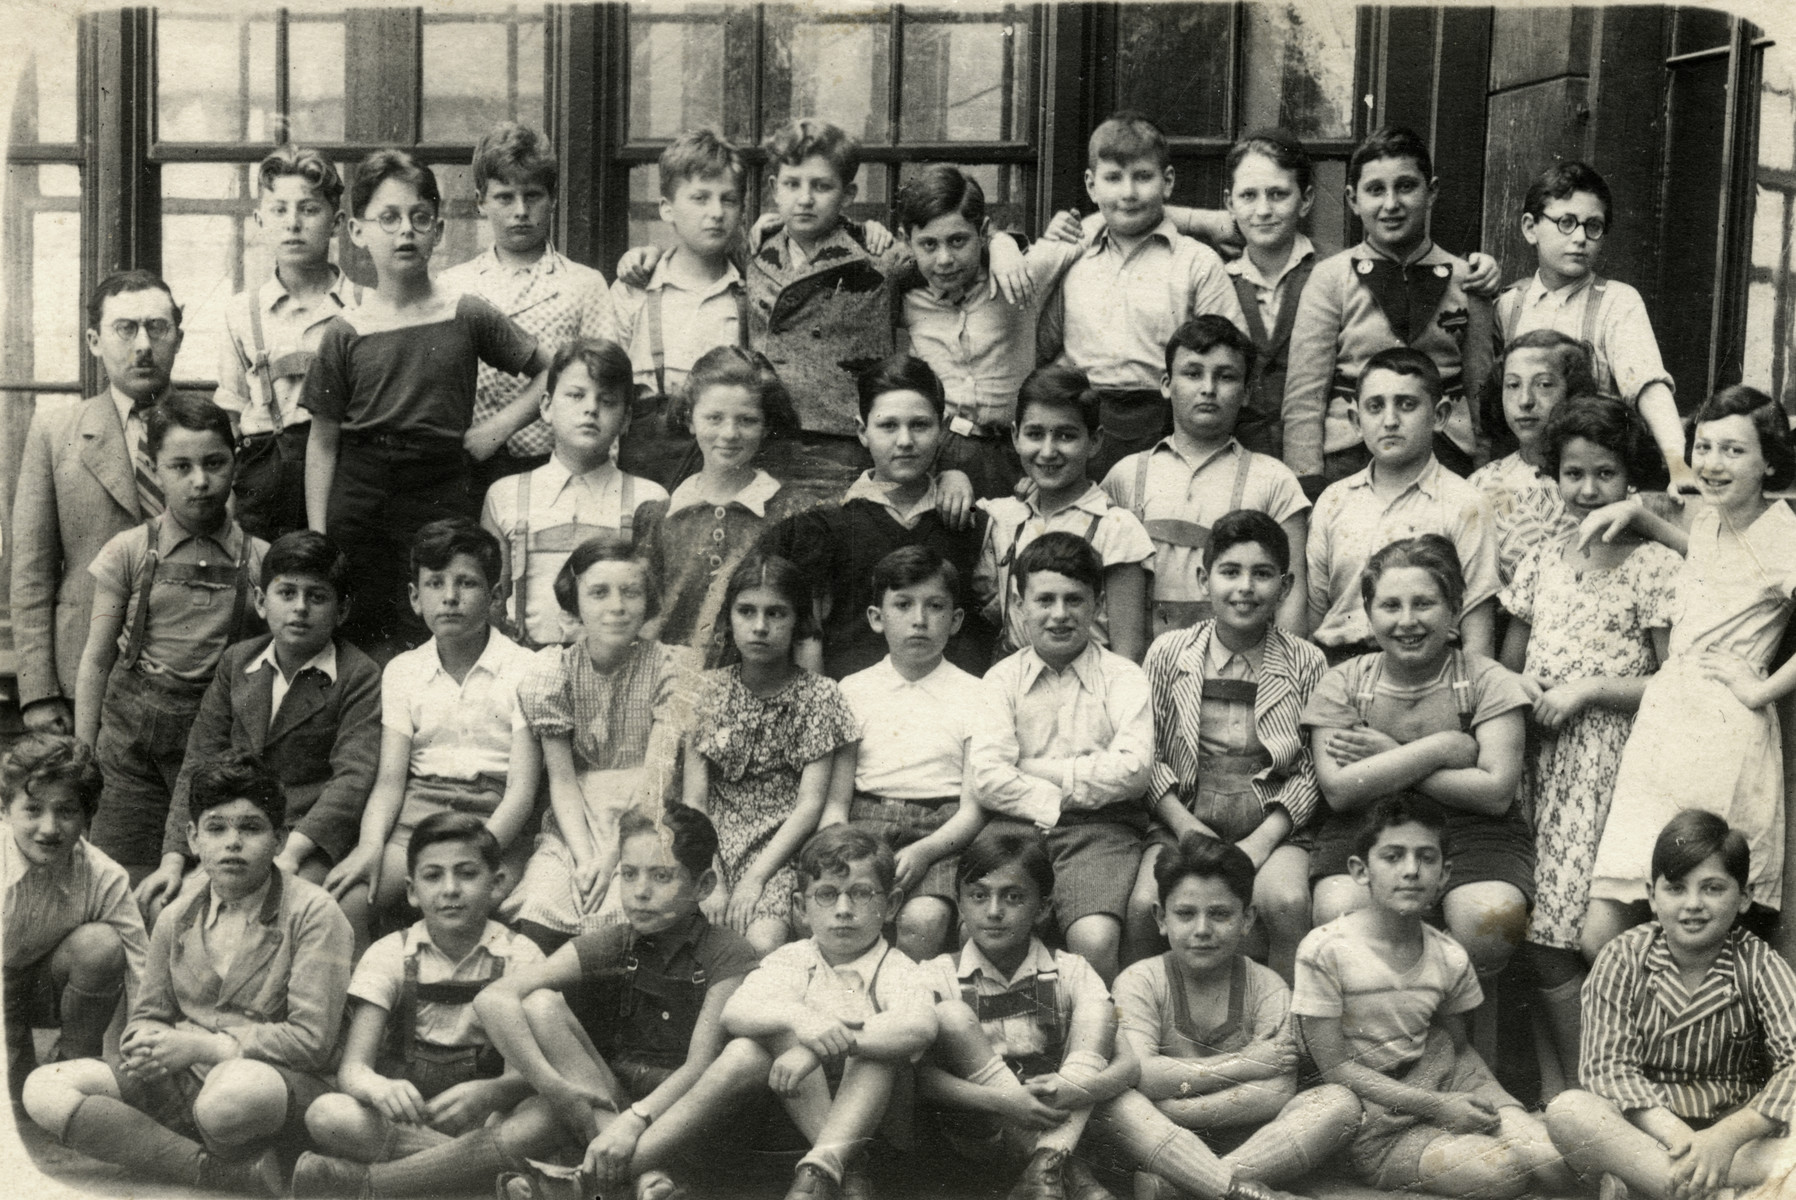 A group photograph of a class of the Chajes Realgymnasium in Vienna. 

Gerda Beruh (age 10)  is standing on the far right in a white dress.